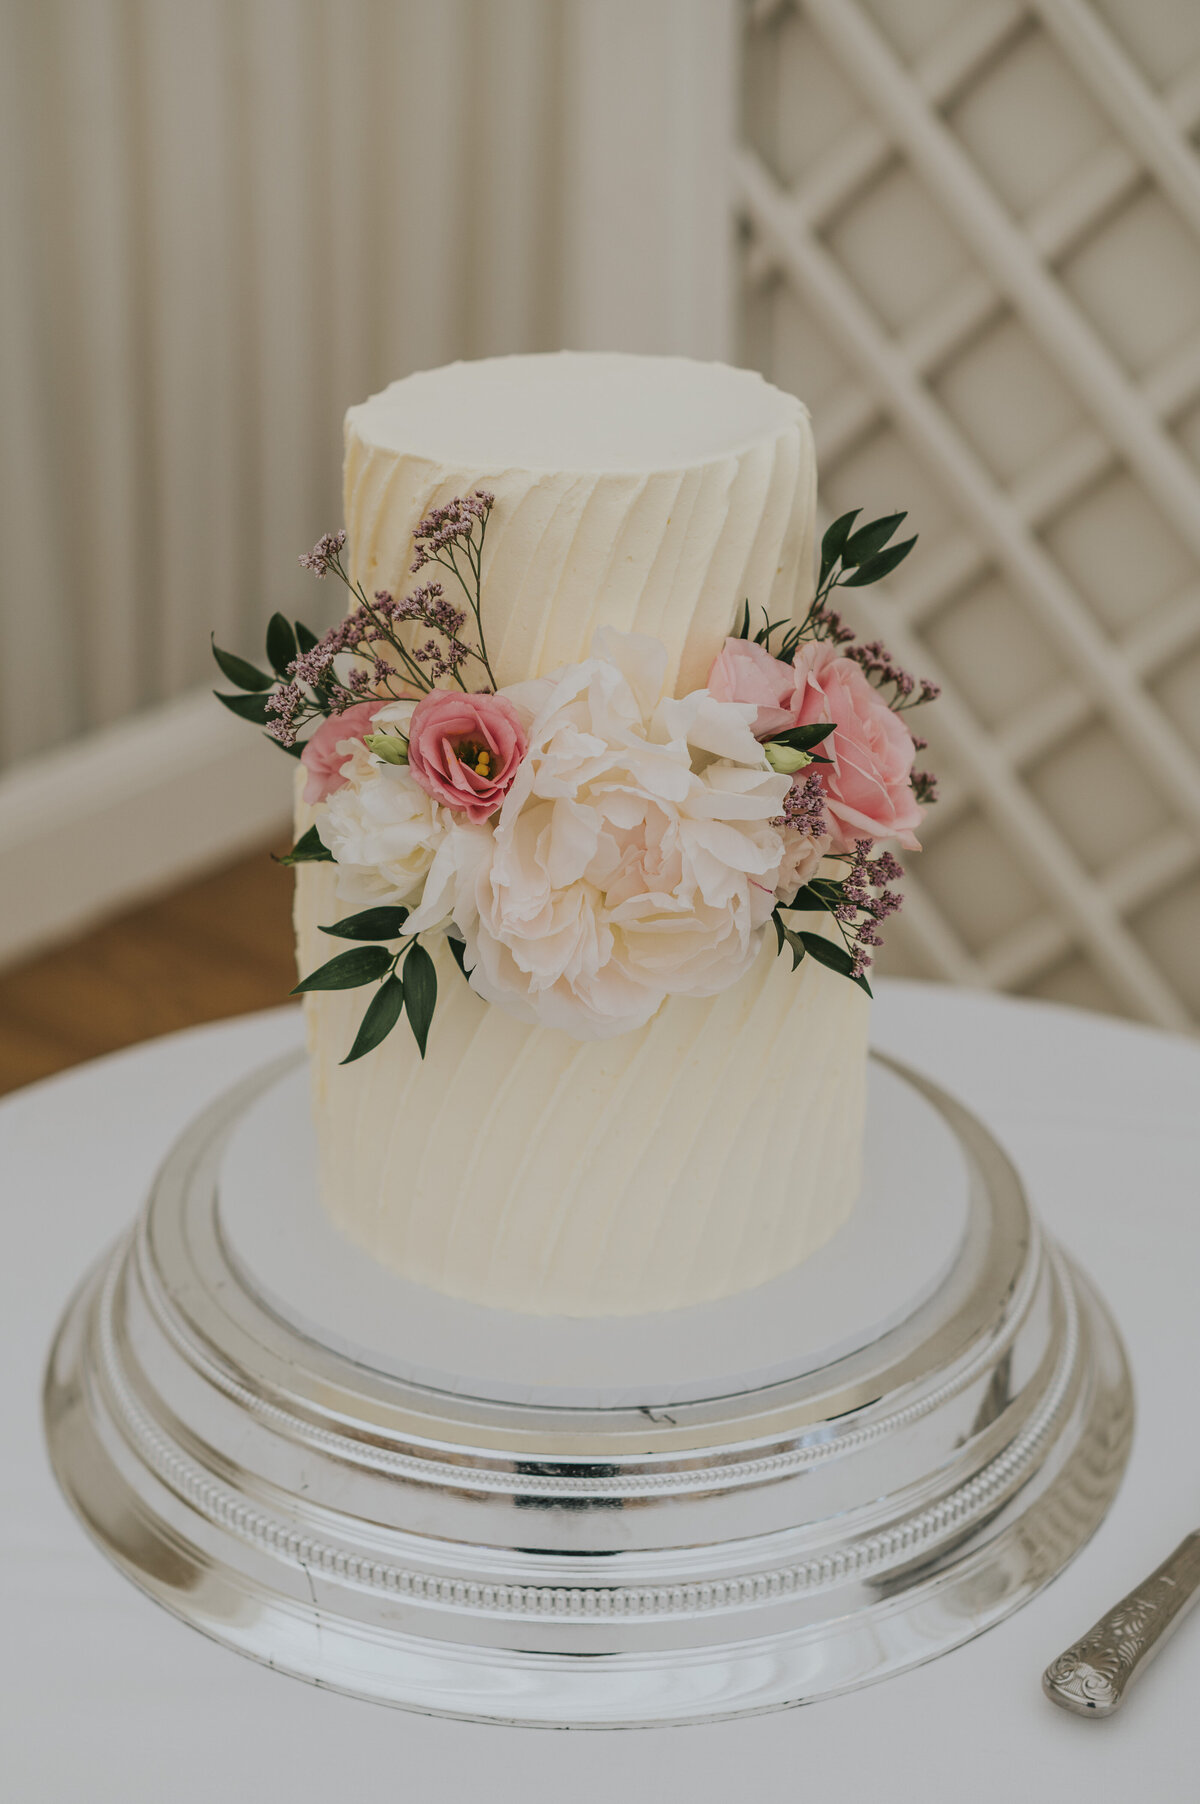 layers-graces-wedding-cake-buttercream-rustic-palette-knife-two-tier-quendon-luxury-fresh-flowers